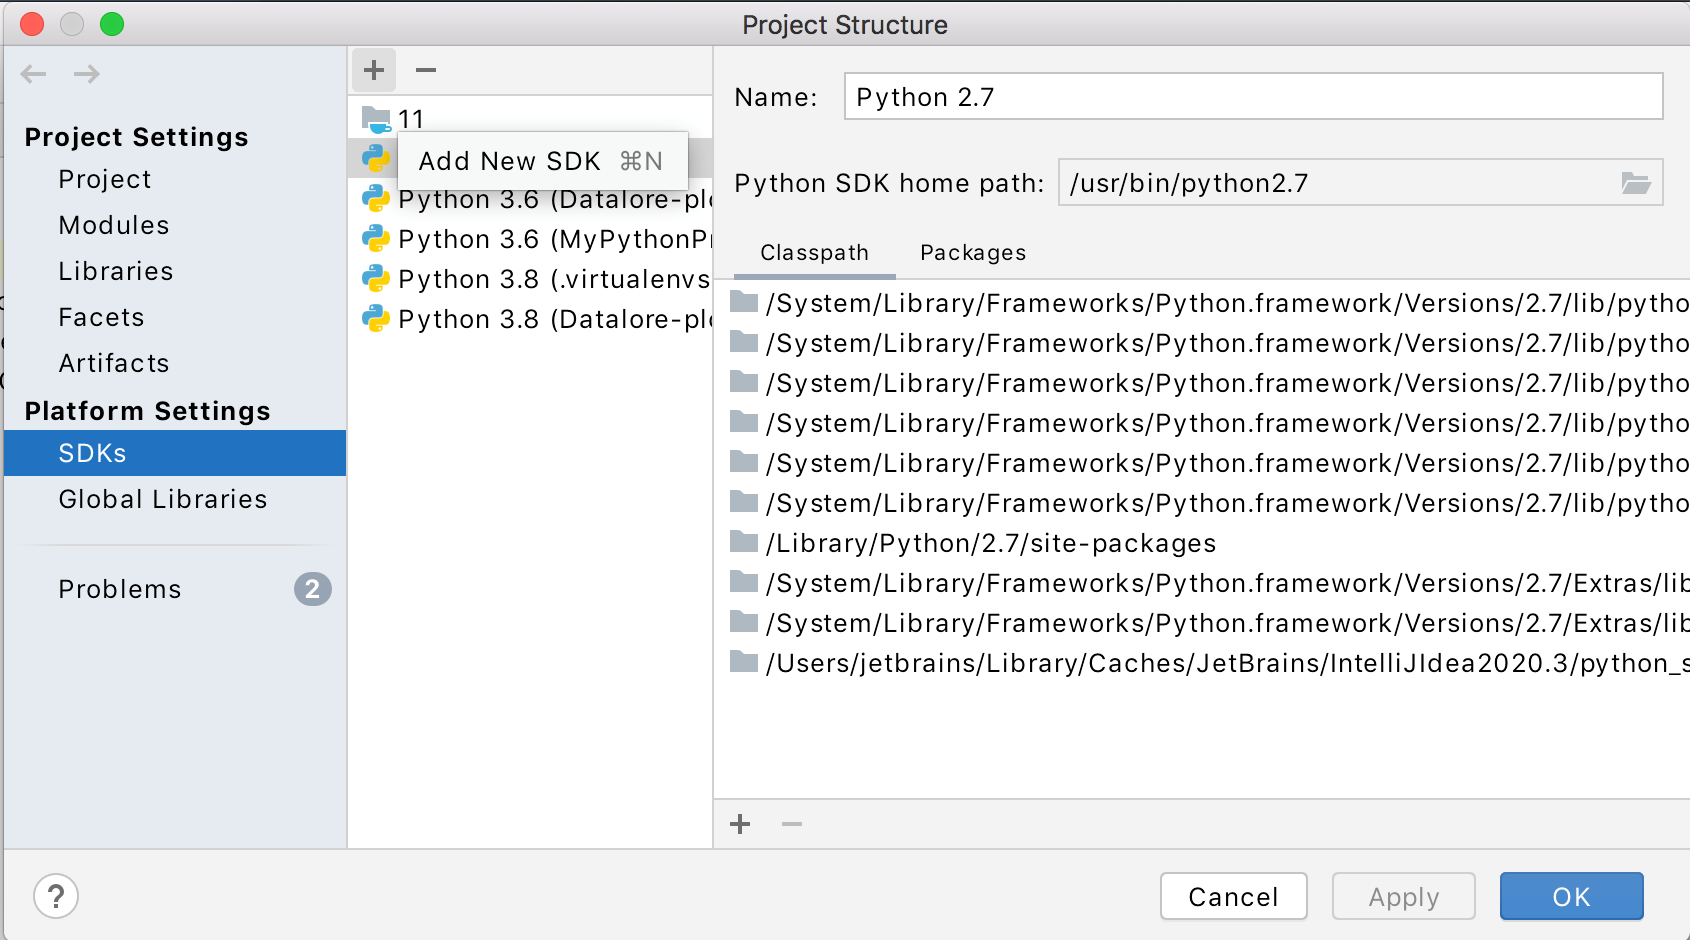 how to install pyspark in intellij